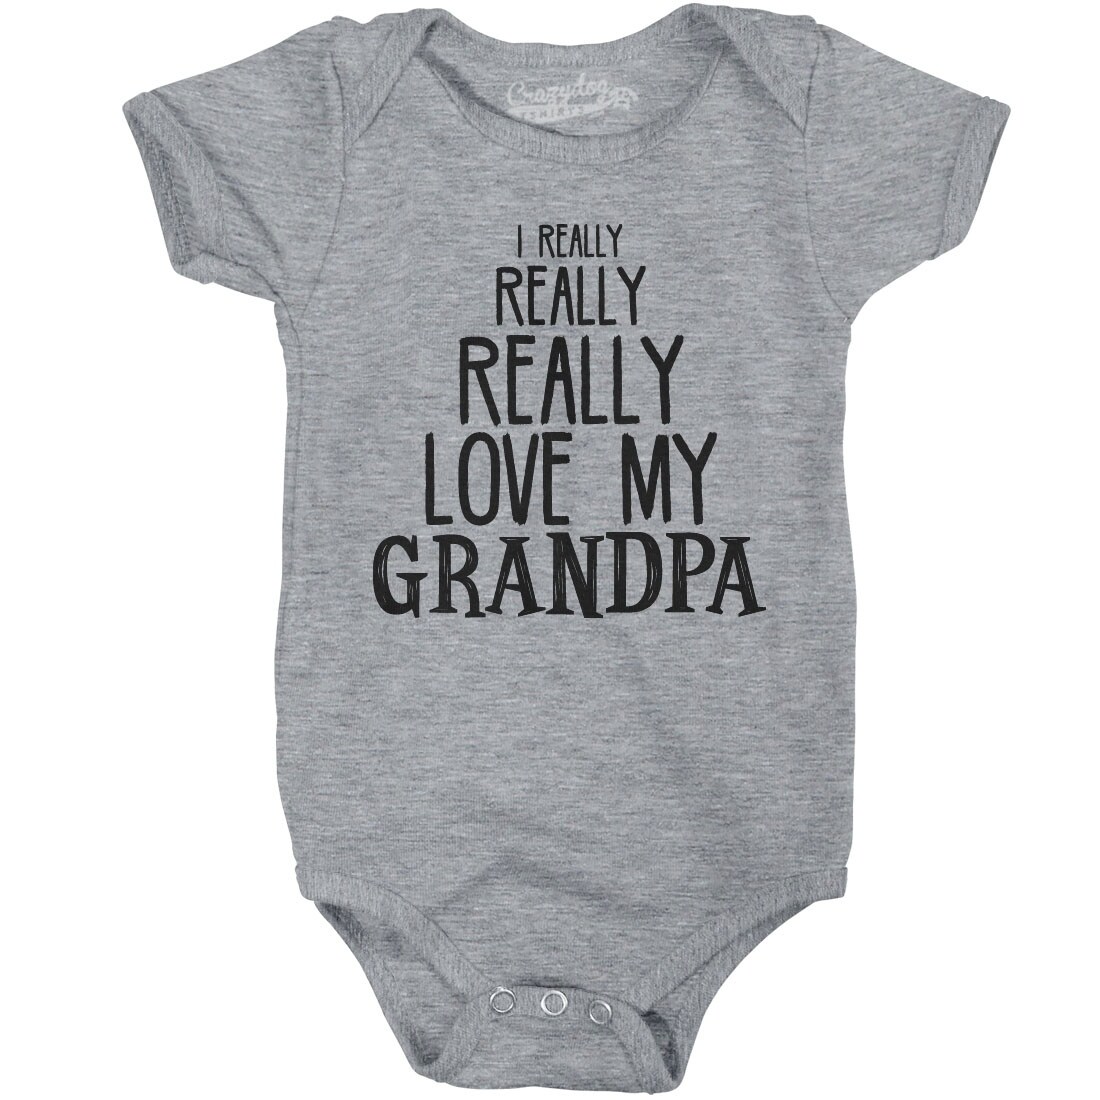 Crazy Dog Tshirts Baby-Enfant Creeper Who Needs Santa When You Have Grandpa Funny Christmas Bodysuit for Baby